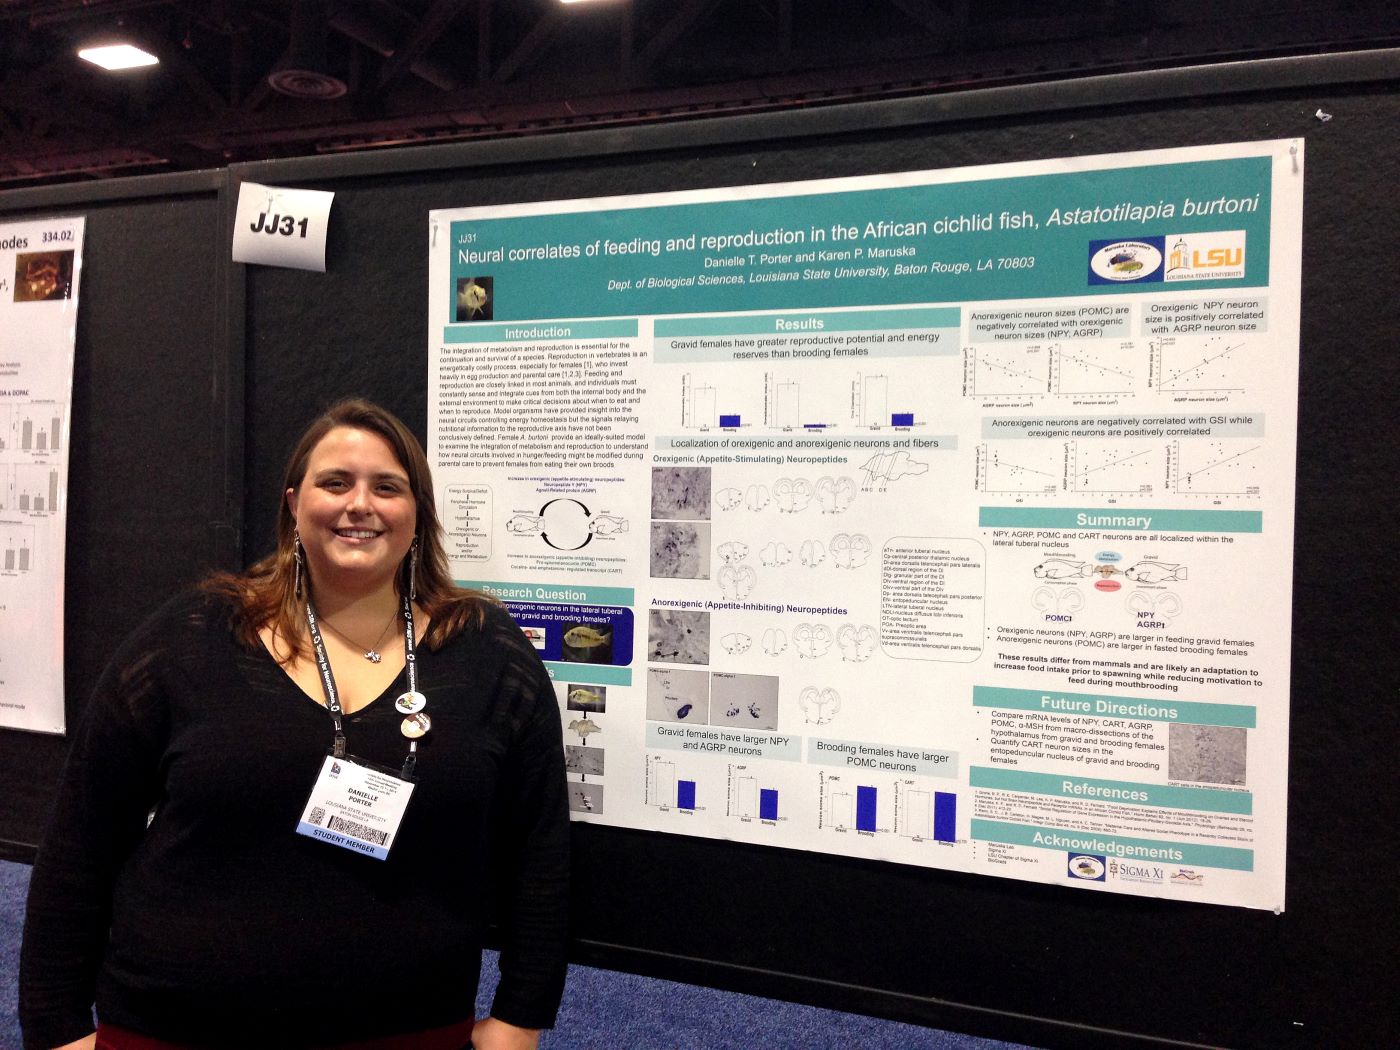 Danielle presents her research at the 2014 Society for Neuroscience meeting in Washington D.C.